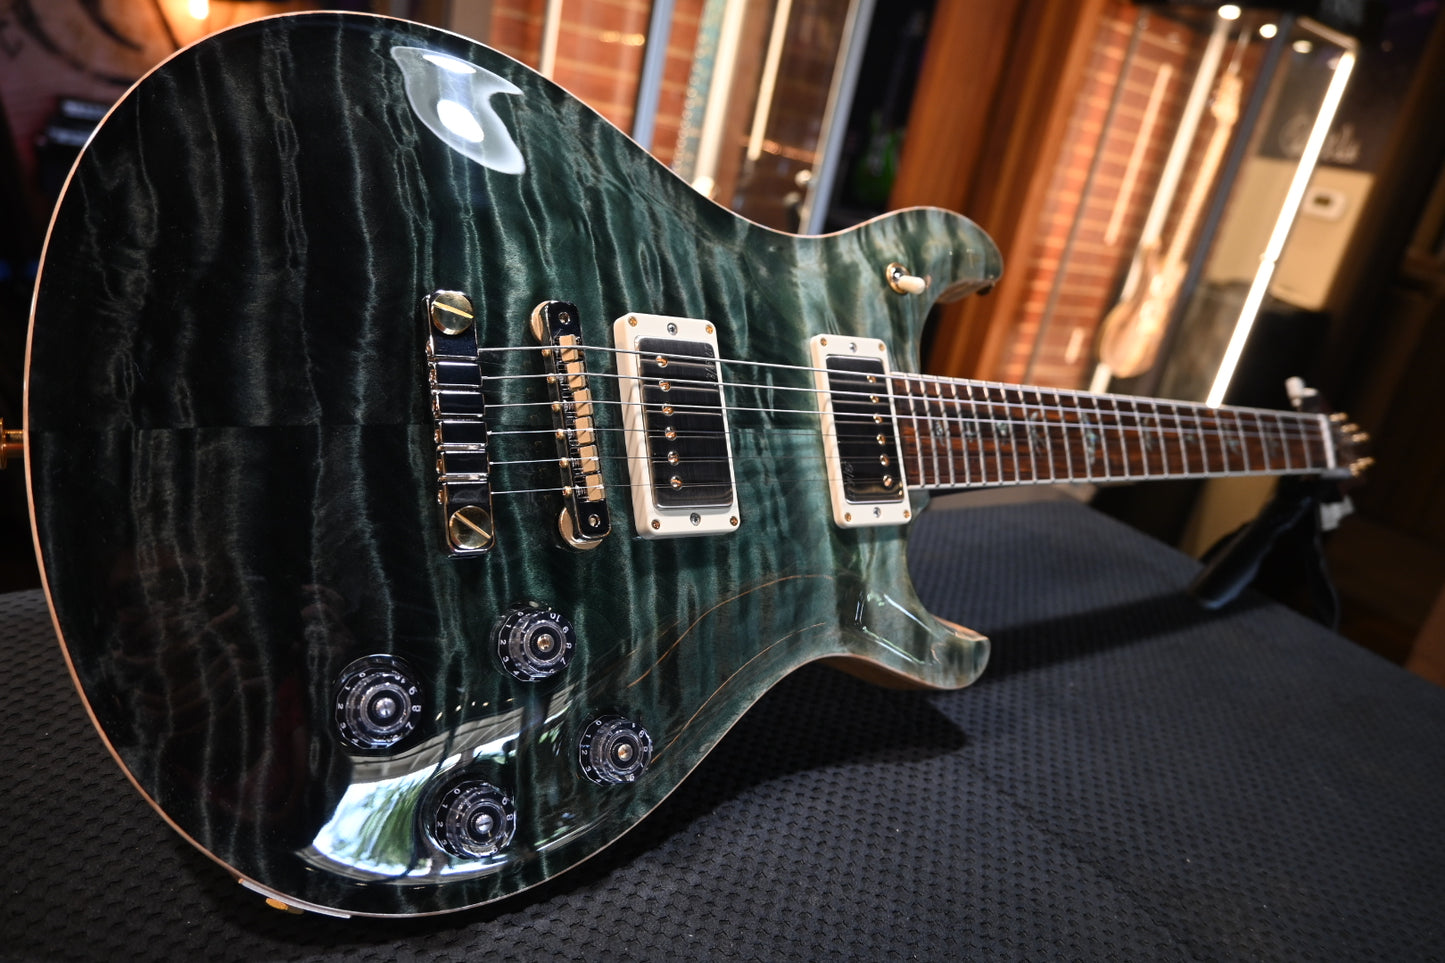 PRS Wood Library McCarty 594 10-Top Quilt Rosewood Neck - Trampas Green Fade Guitar #8975 - Danville Music